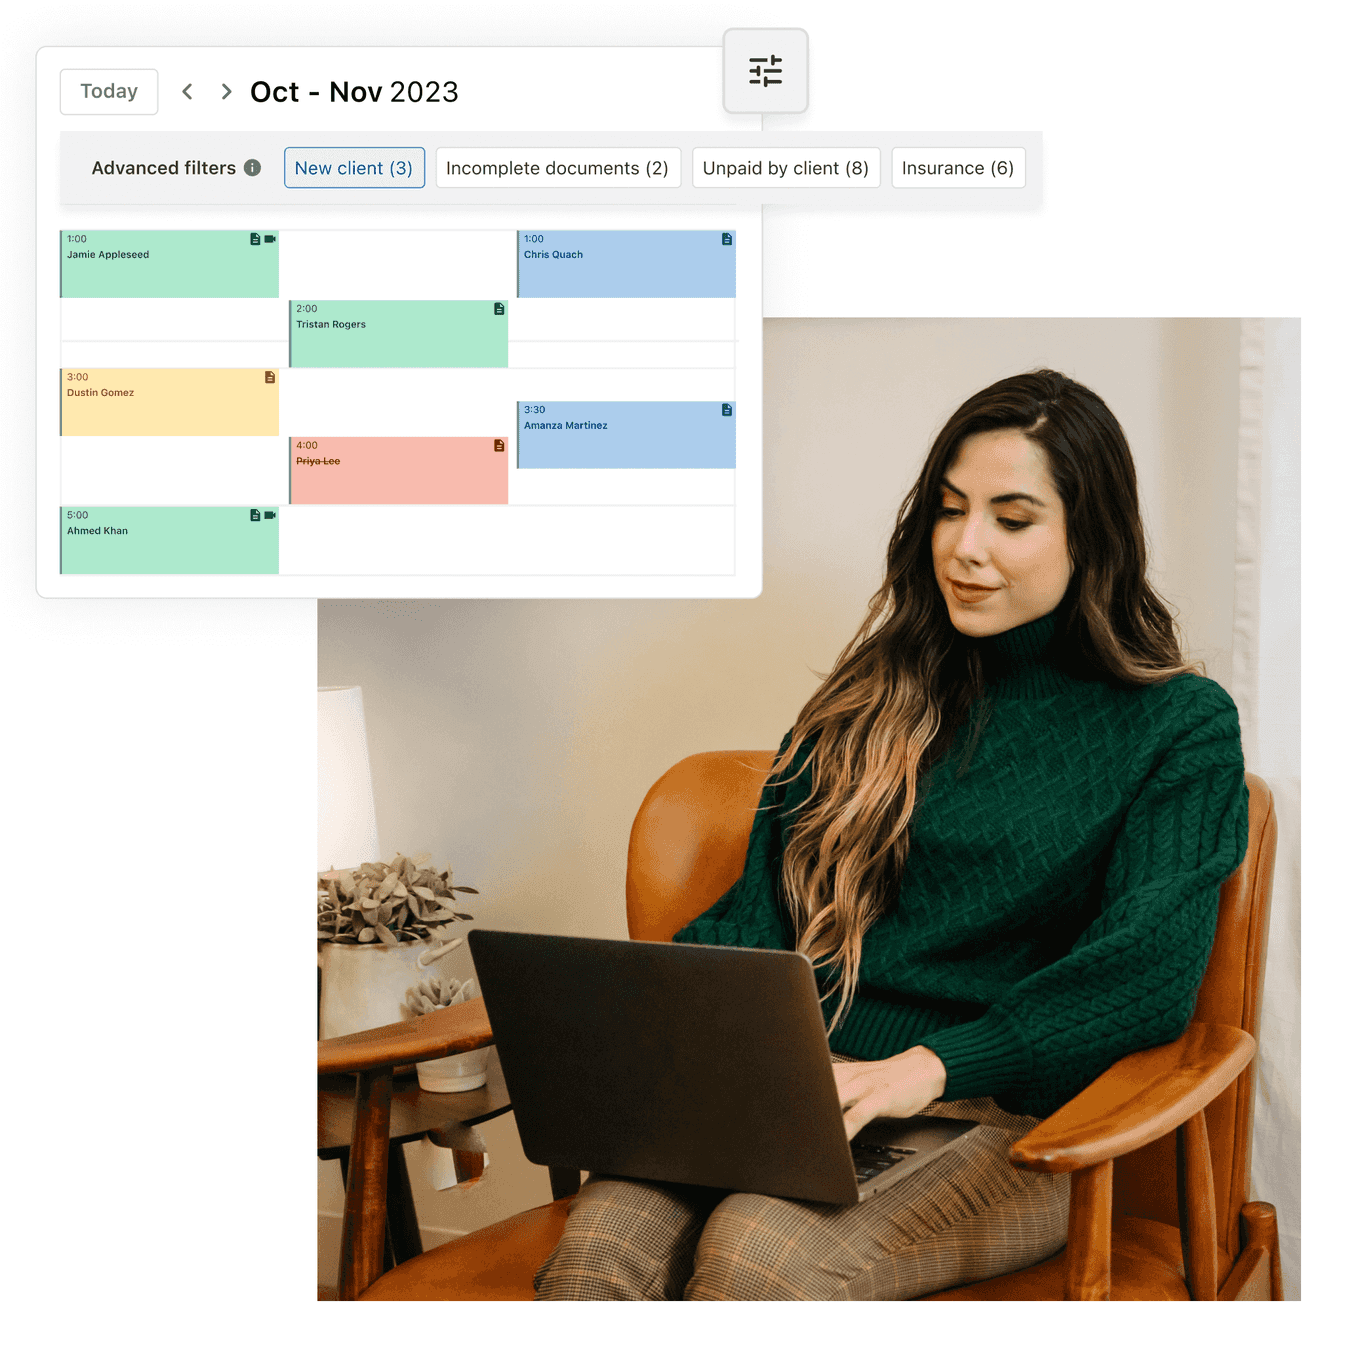 therapist using calendar filters on their scheduling software for therapists